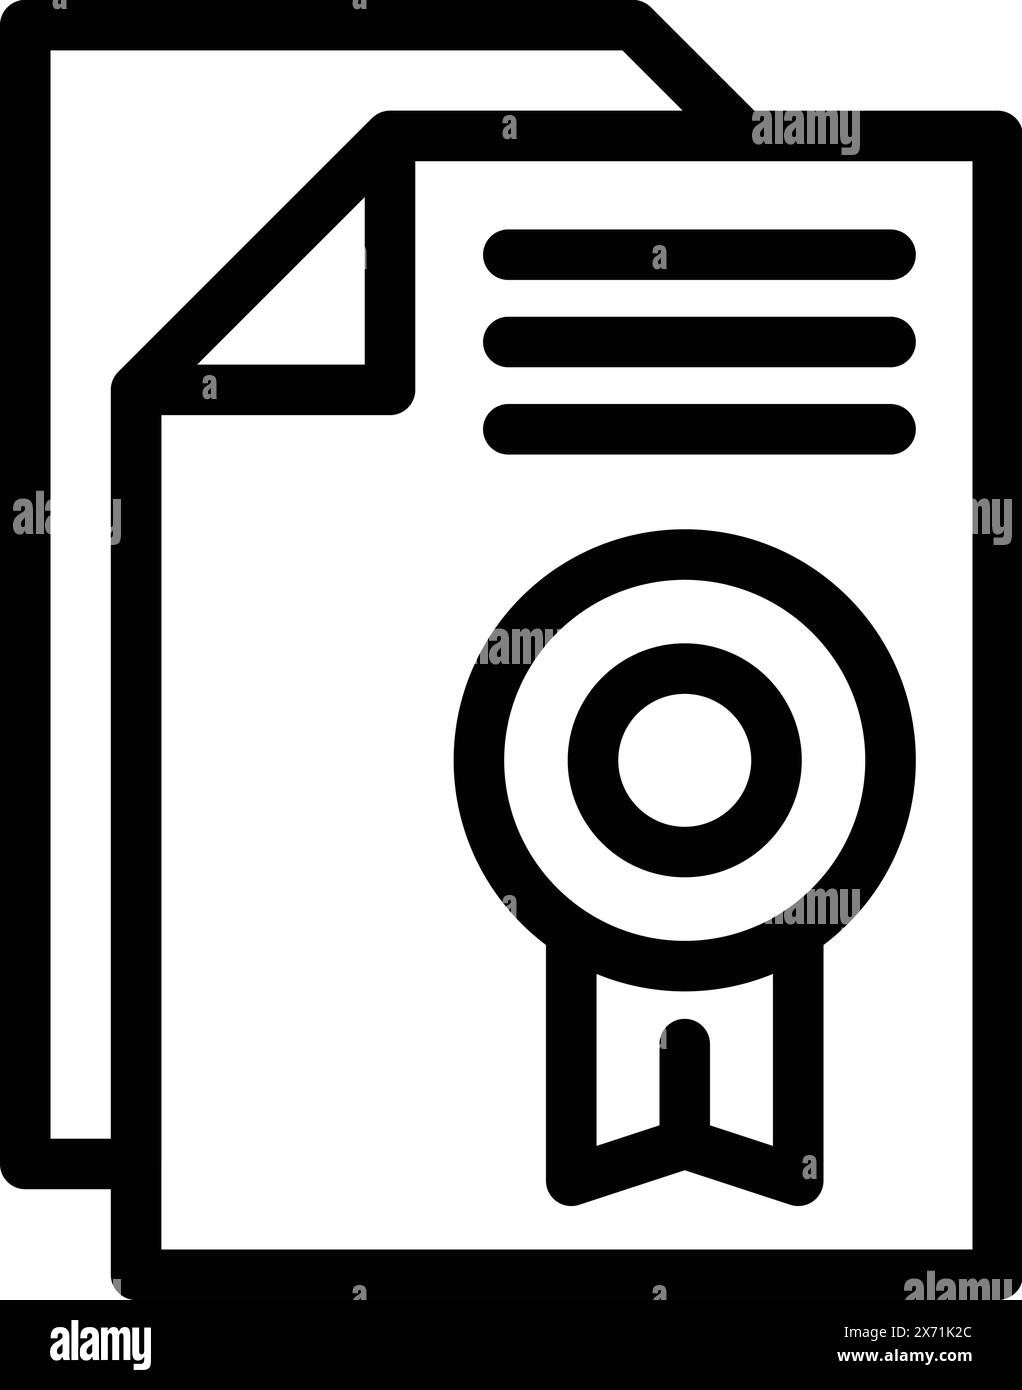 Certified diploma icon illustration with black and white minimalist flat design. Symbolizing academic success. Professional recognition. And completion of education Stock Vector